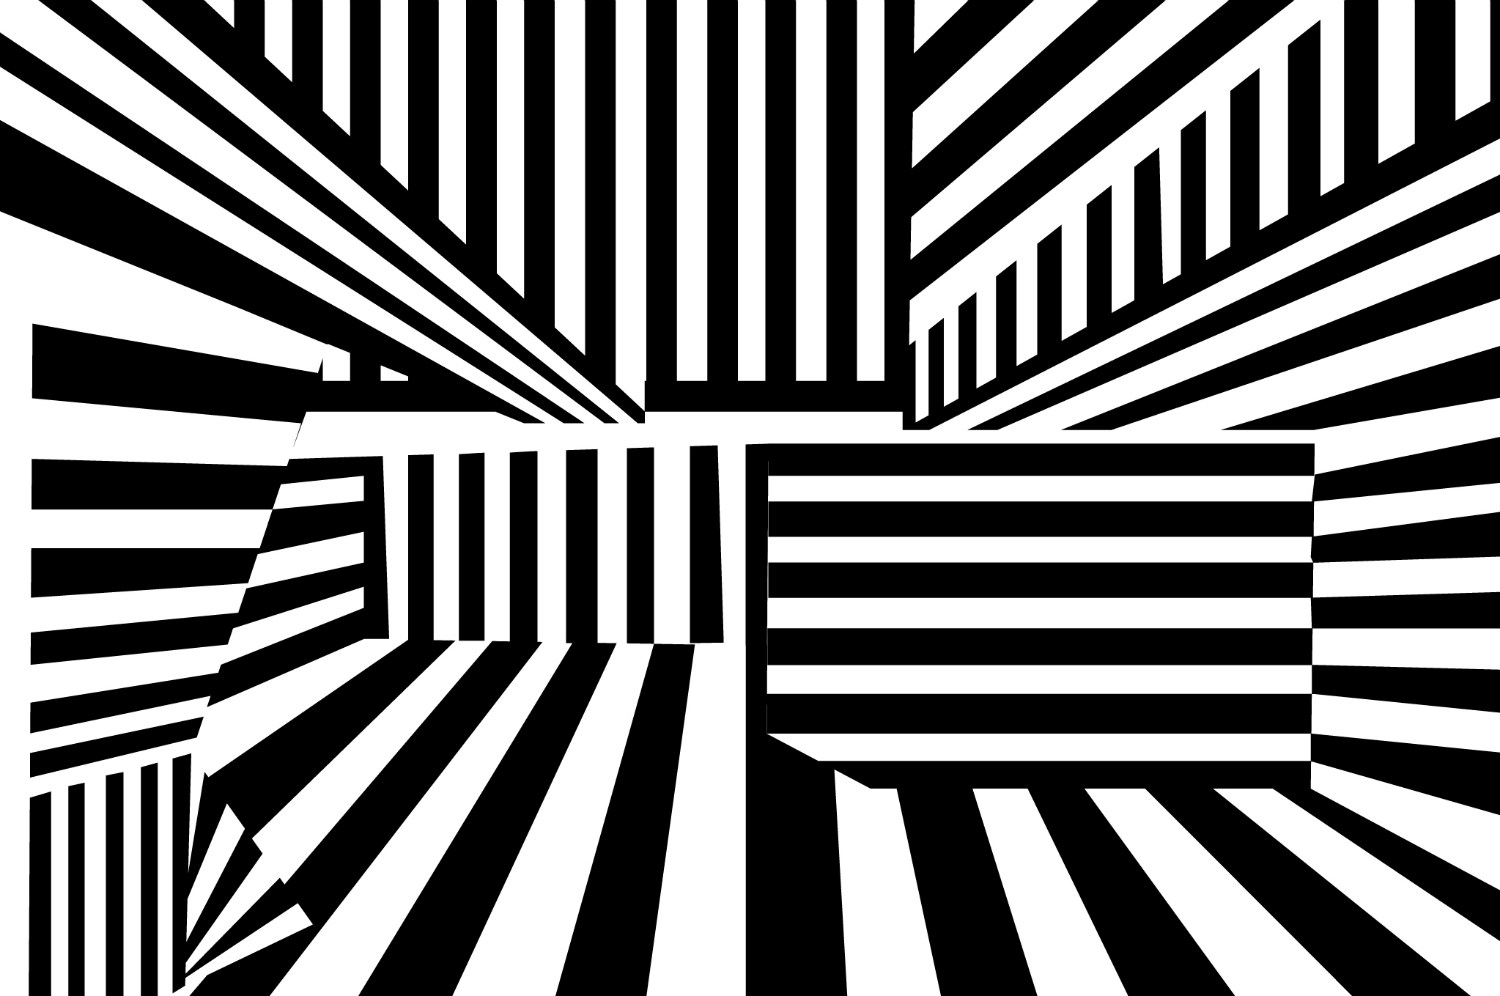 Optical Illusion Art: 5 Mind-Bending Works by Victor Vasarely